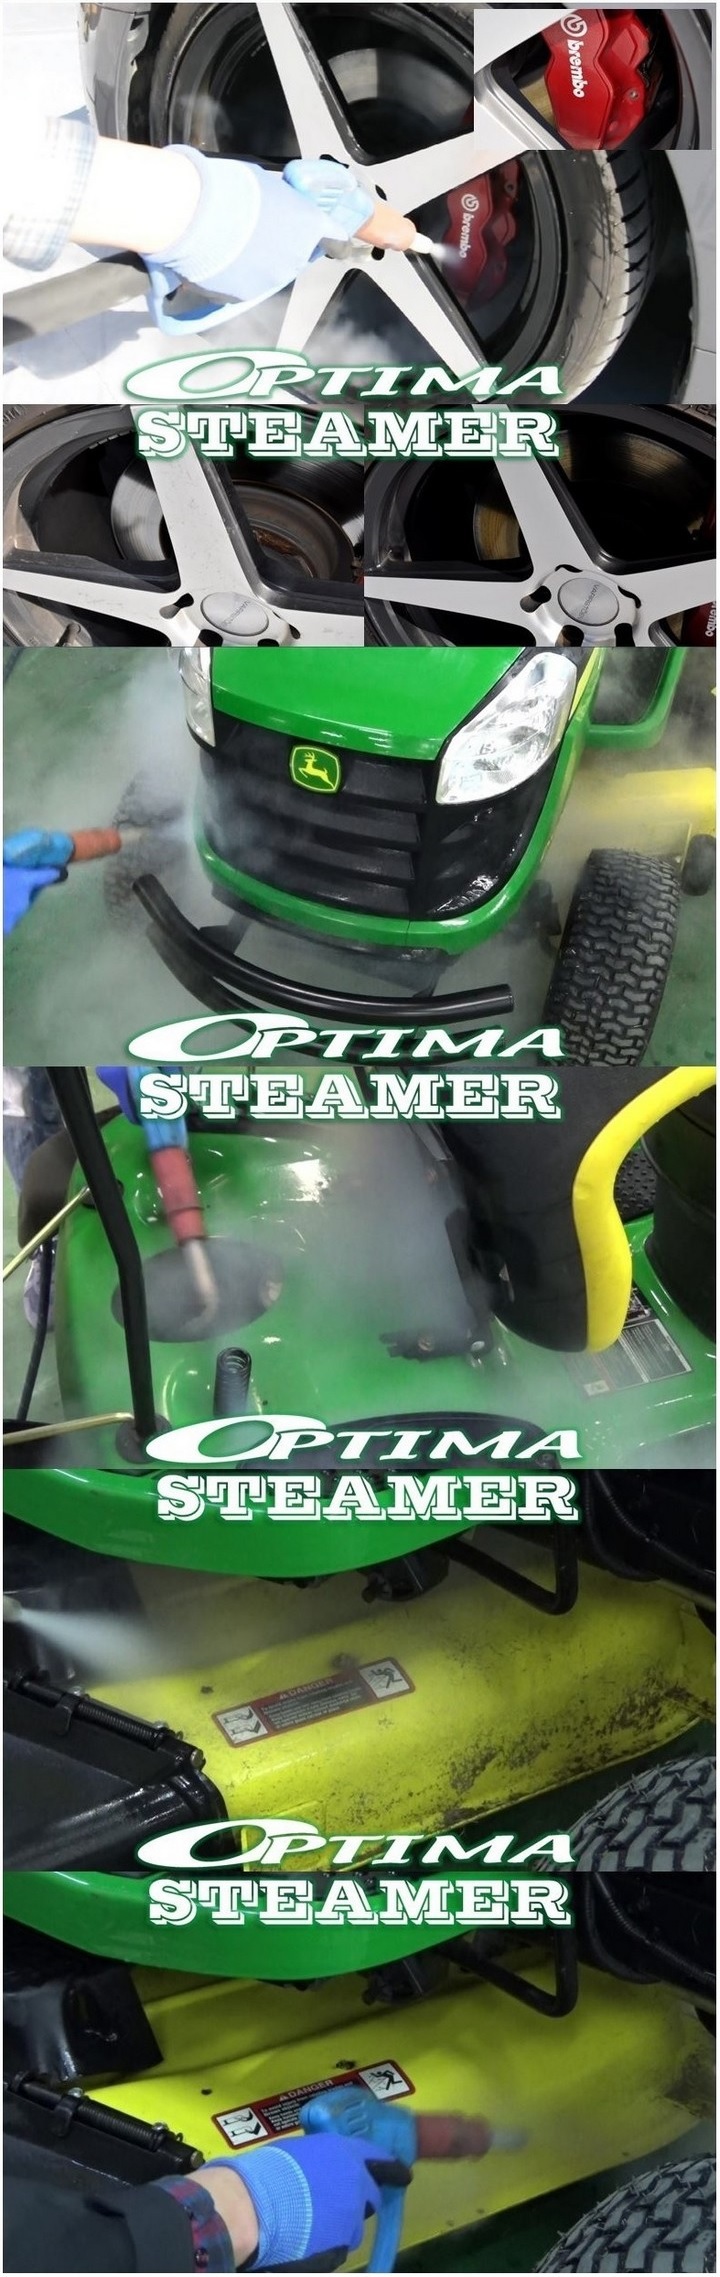 03 steam cleaning